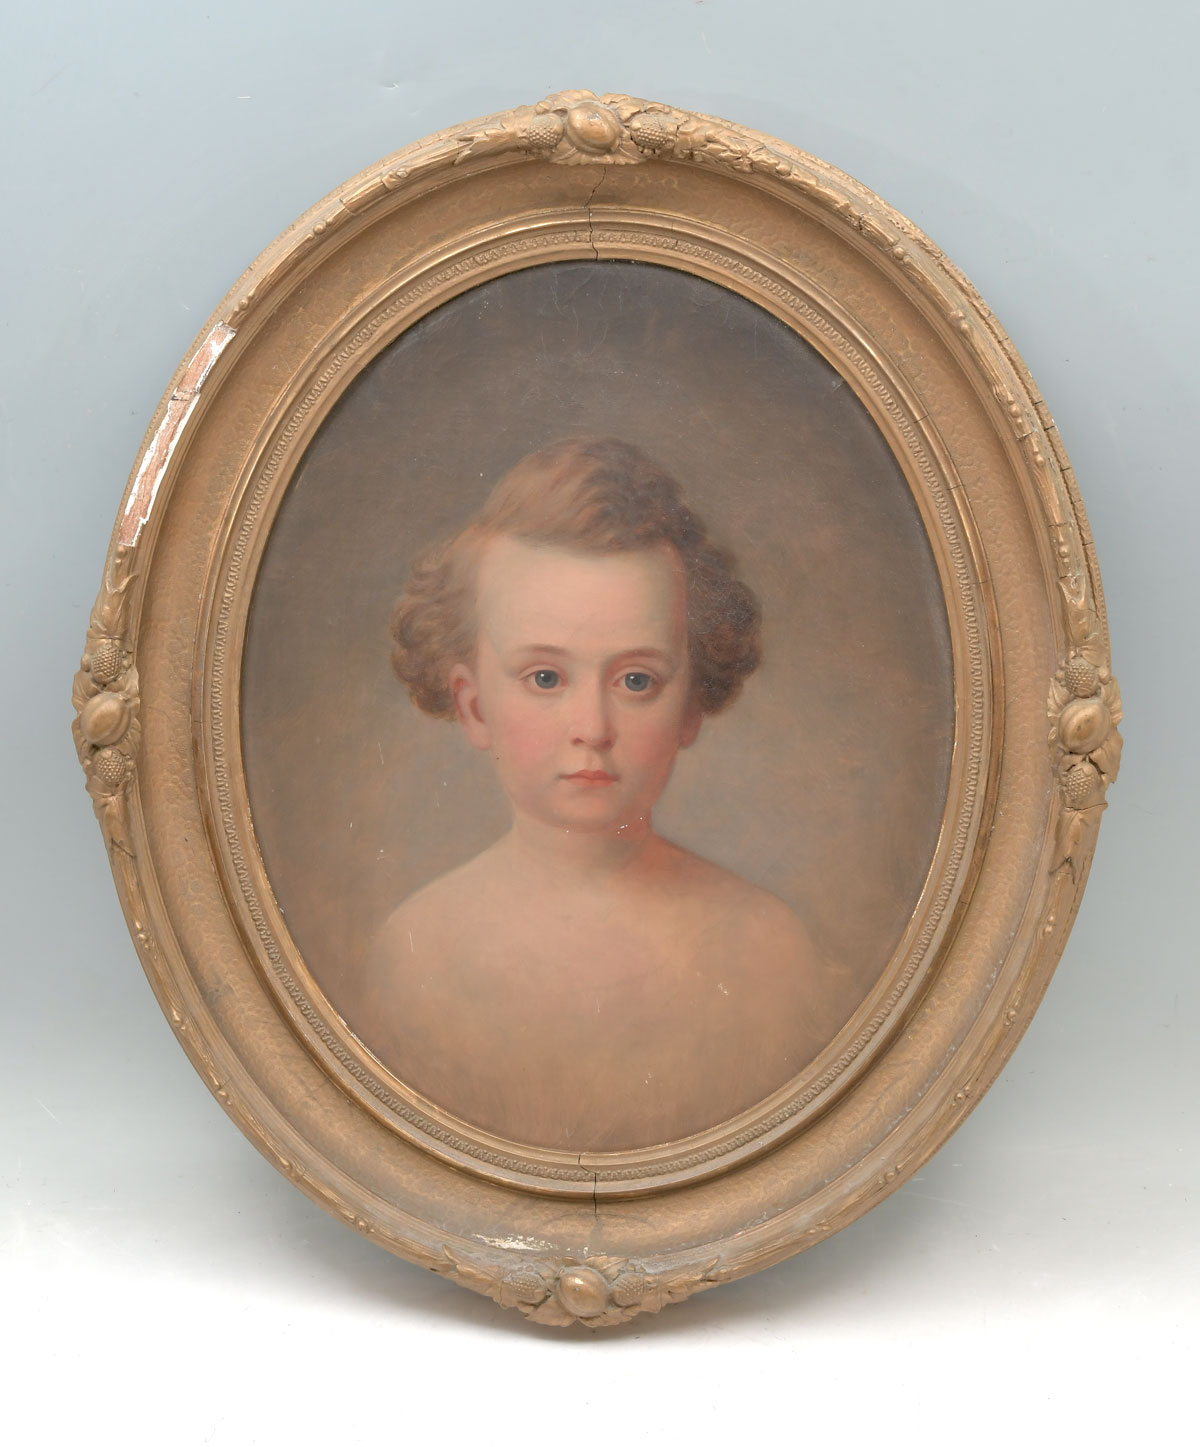 EARLY OVAL PORTRAIT PAINTING OF